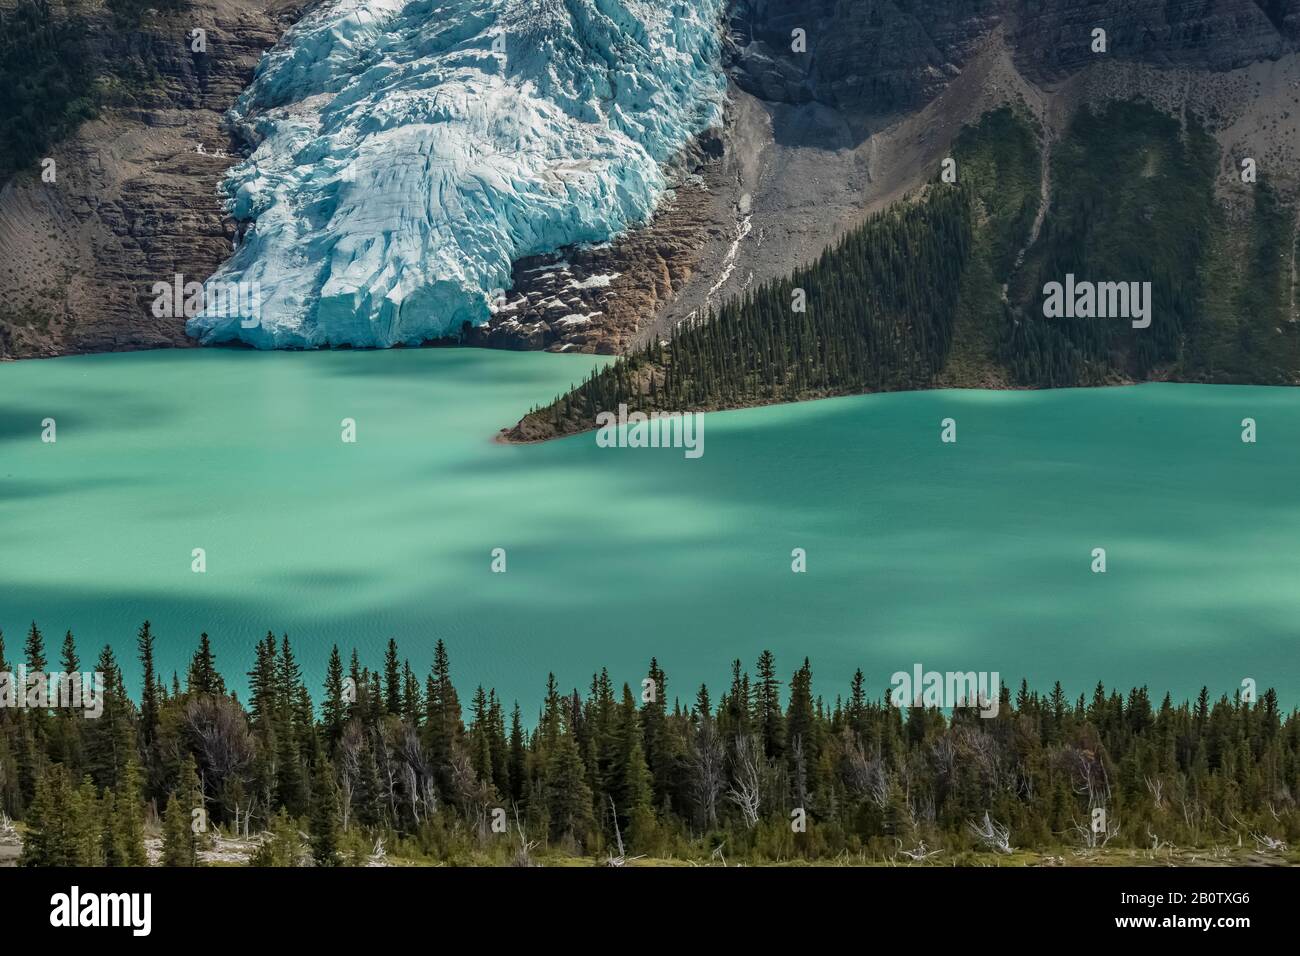 Cloud shadows on the surface of Berg Lake, viewed from Hargreaves Lake area in Mount Robson Provincial Park, British Columbia, Canada Stock Photo